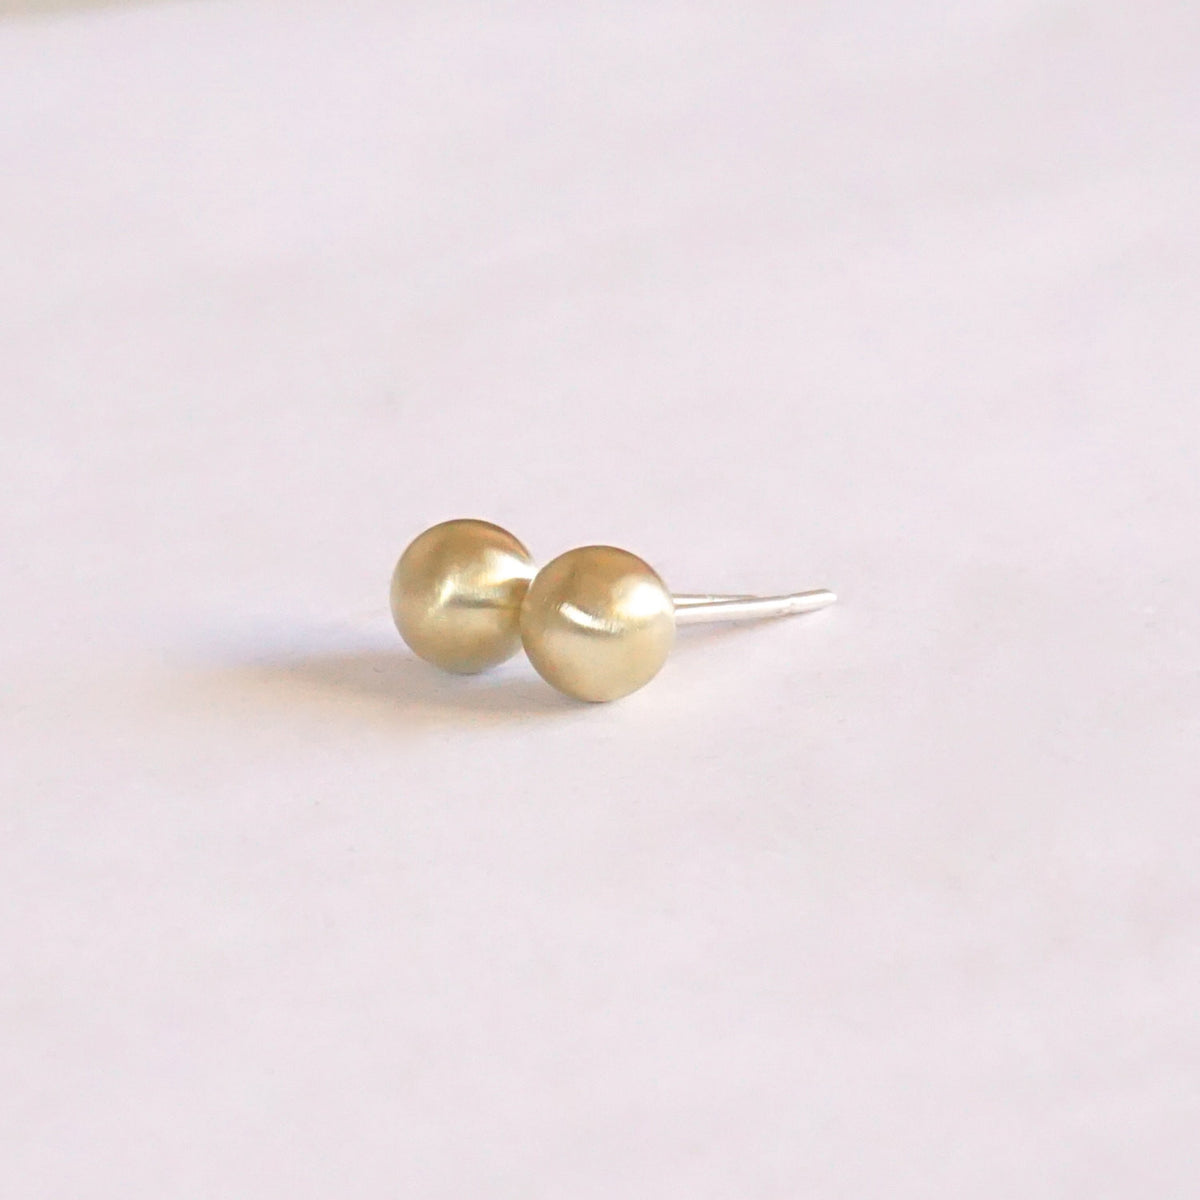 Well Designed, Sophisticated, Hand-Crafted Solid Brass Ball Stud Earrings - 0201 - Virginia Wynne Designs